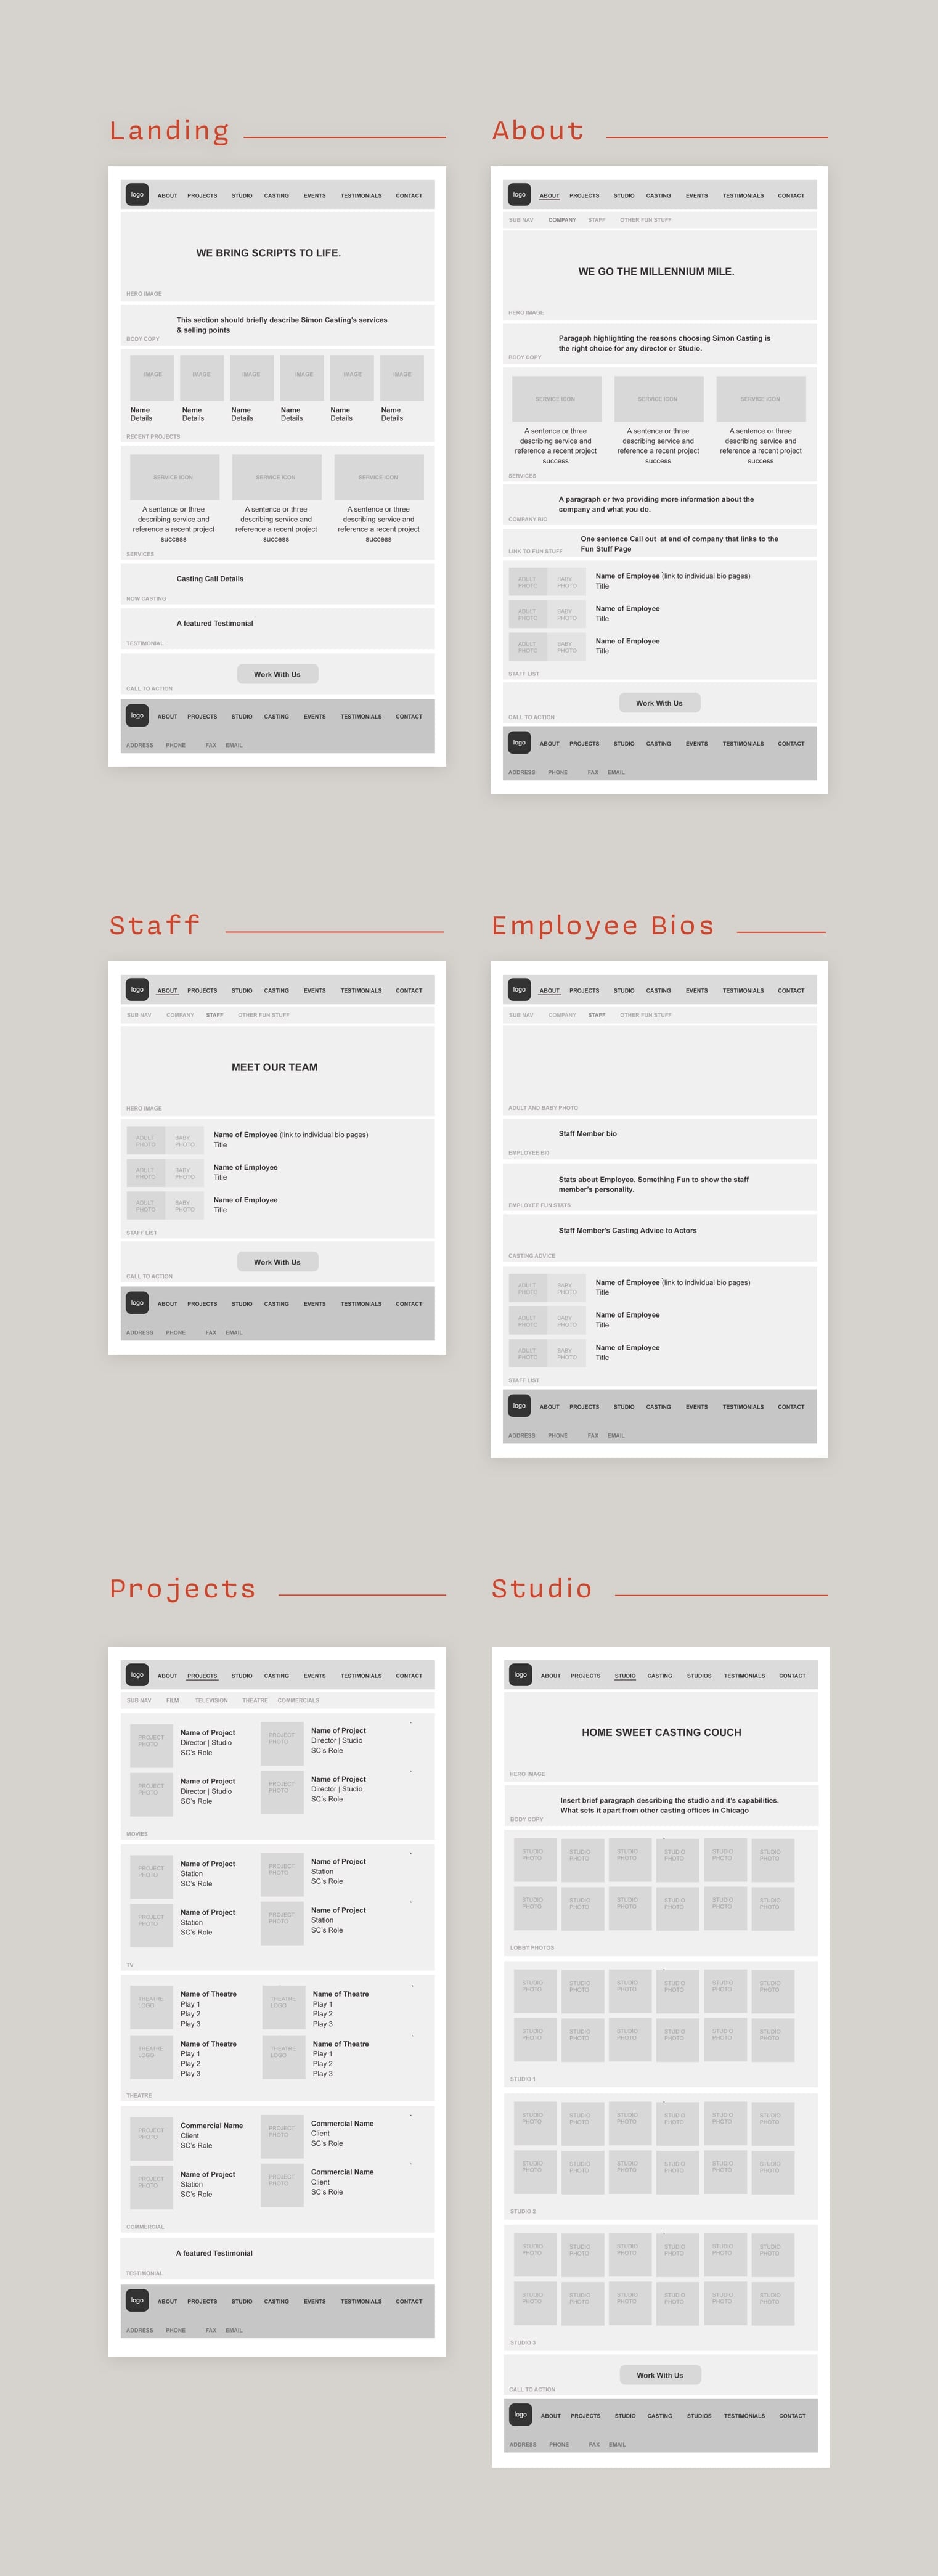 Wireframes for Redesign